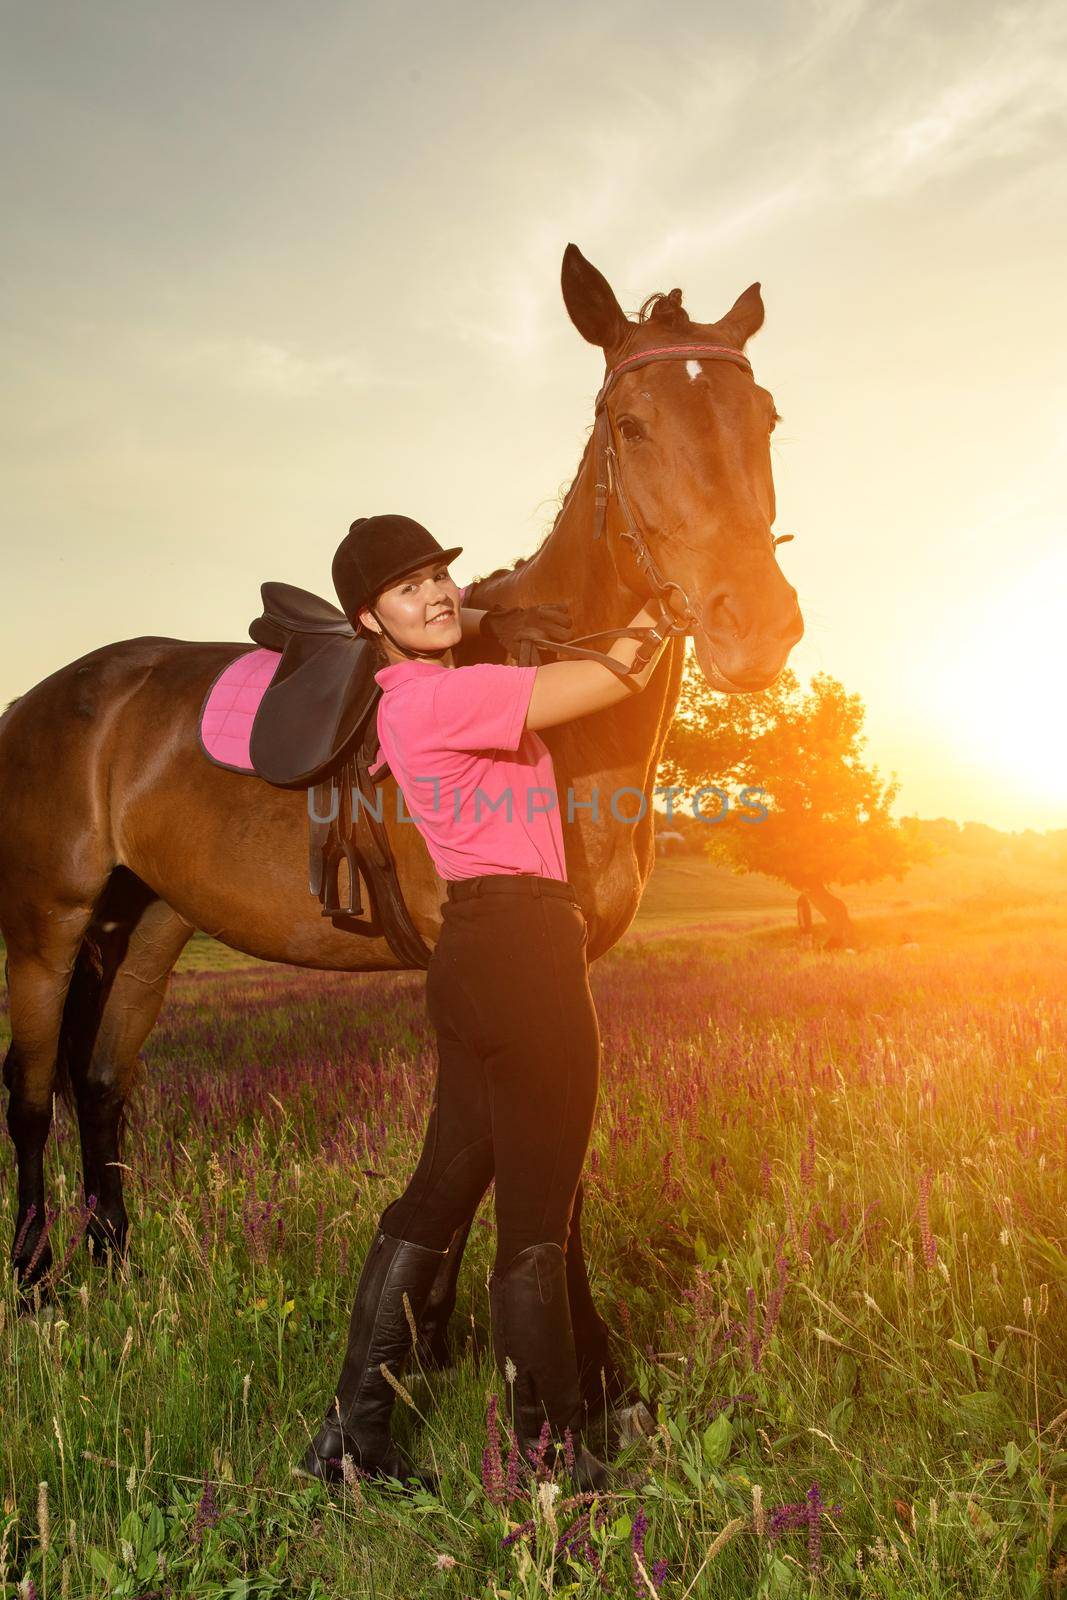 Beautiful young girl smile at her horse dressing uniform competition: outdoors portrait on sunset. Taking care of animals, love and friendship concept.